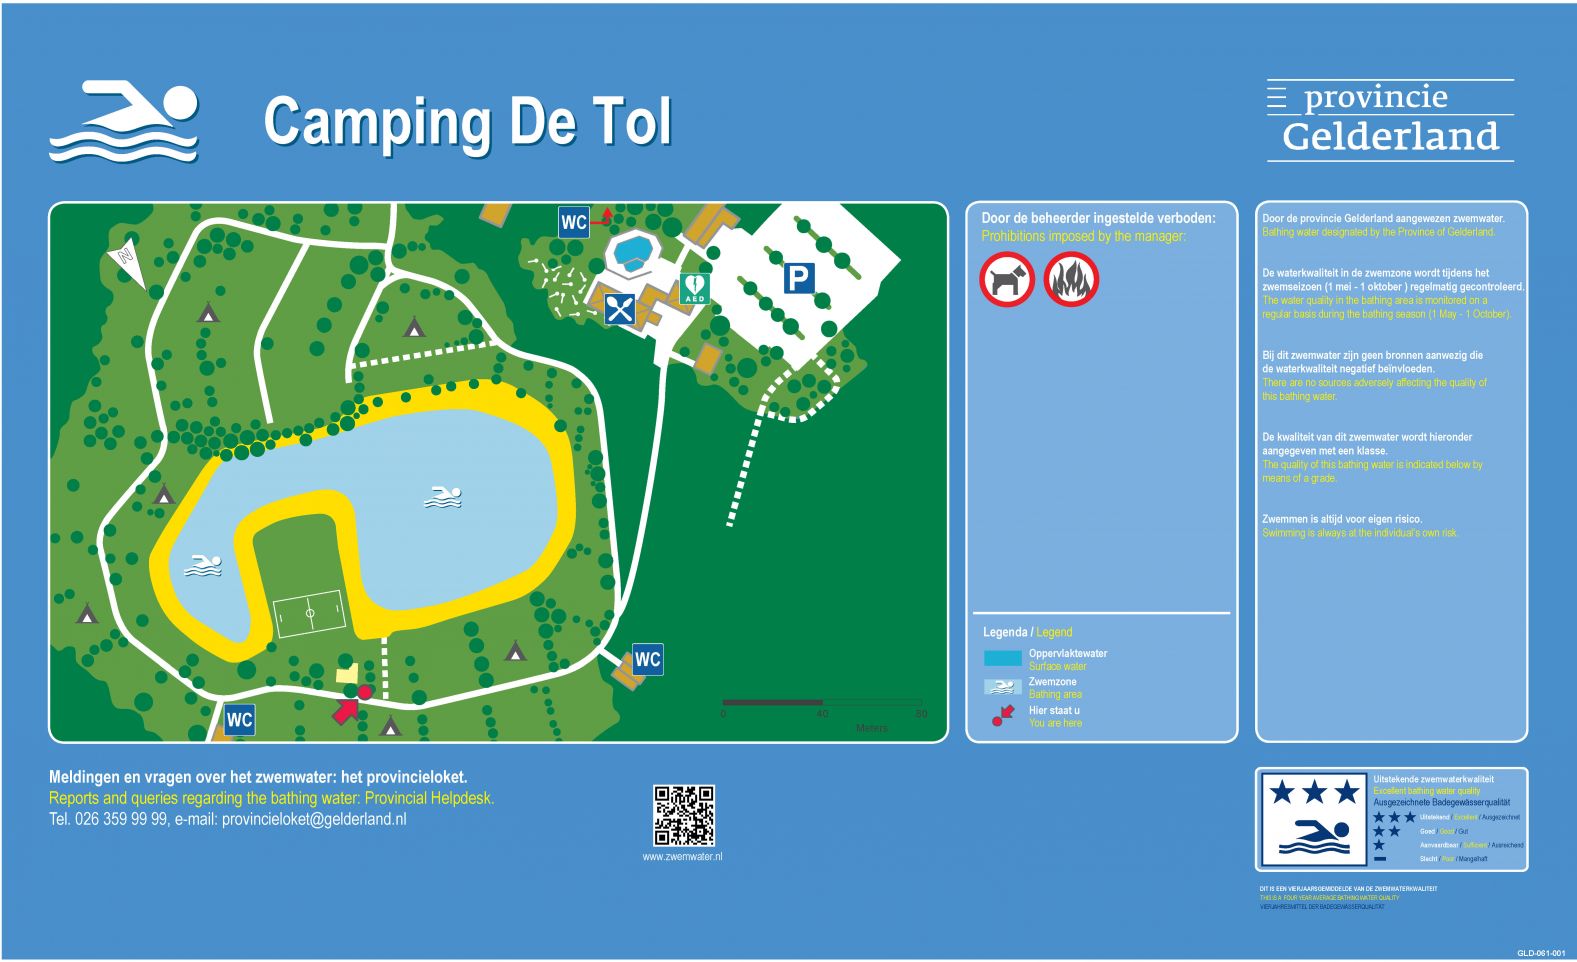 The information board at the swimming location Camping De Tol